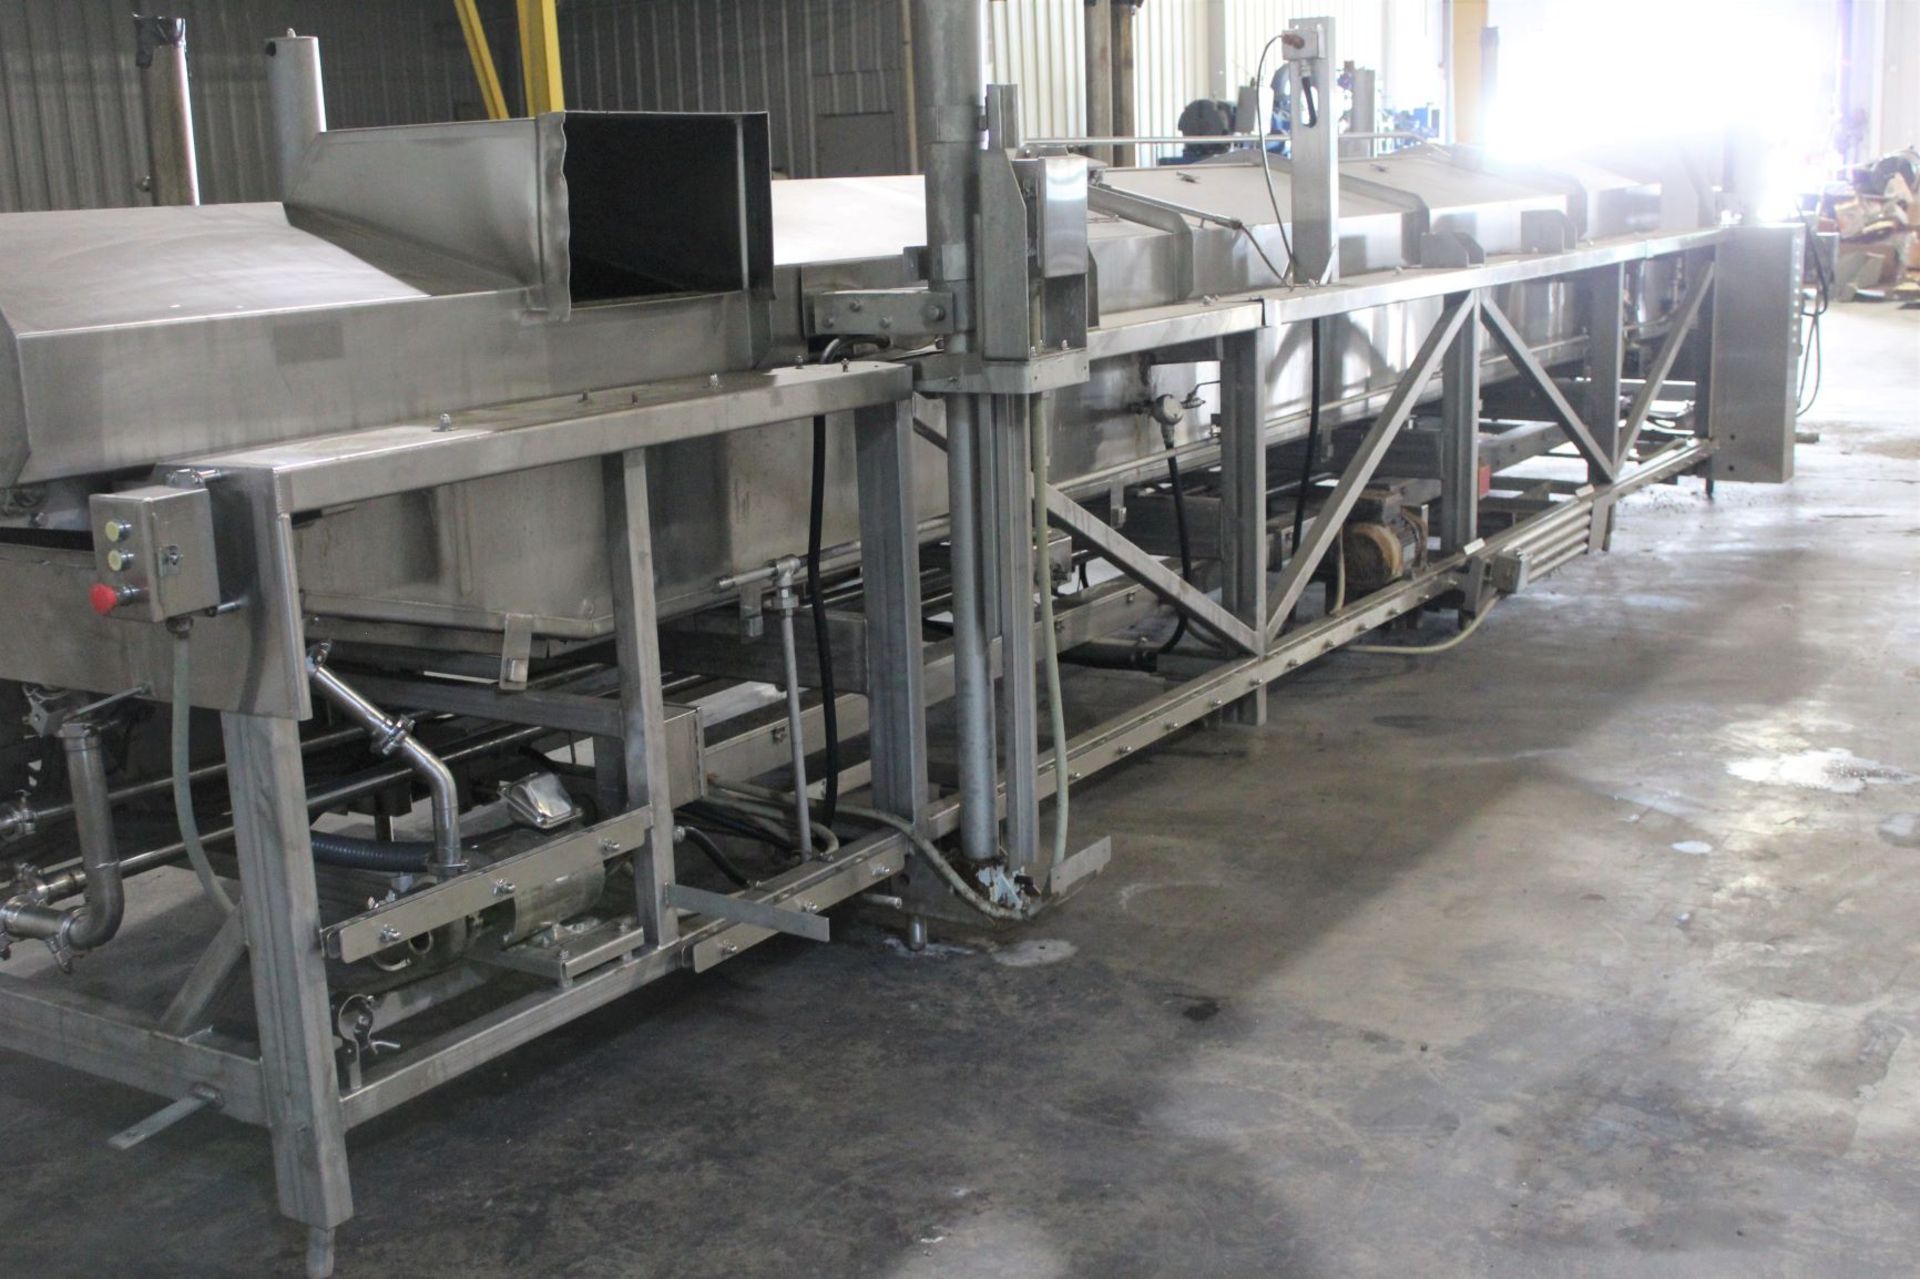 Stein Thermal Fin Fryer, Model# TFF-IV-3428, Serial# 140, 34" wide x 28' long, Item# mtlstetff140, - Image 5 of 6